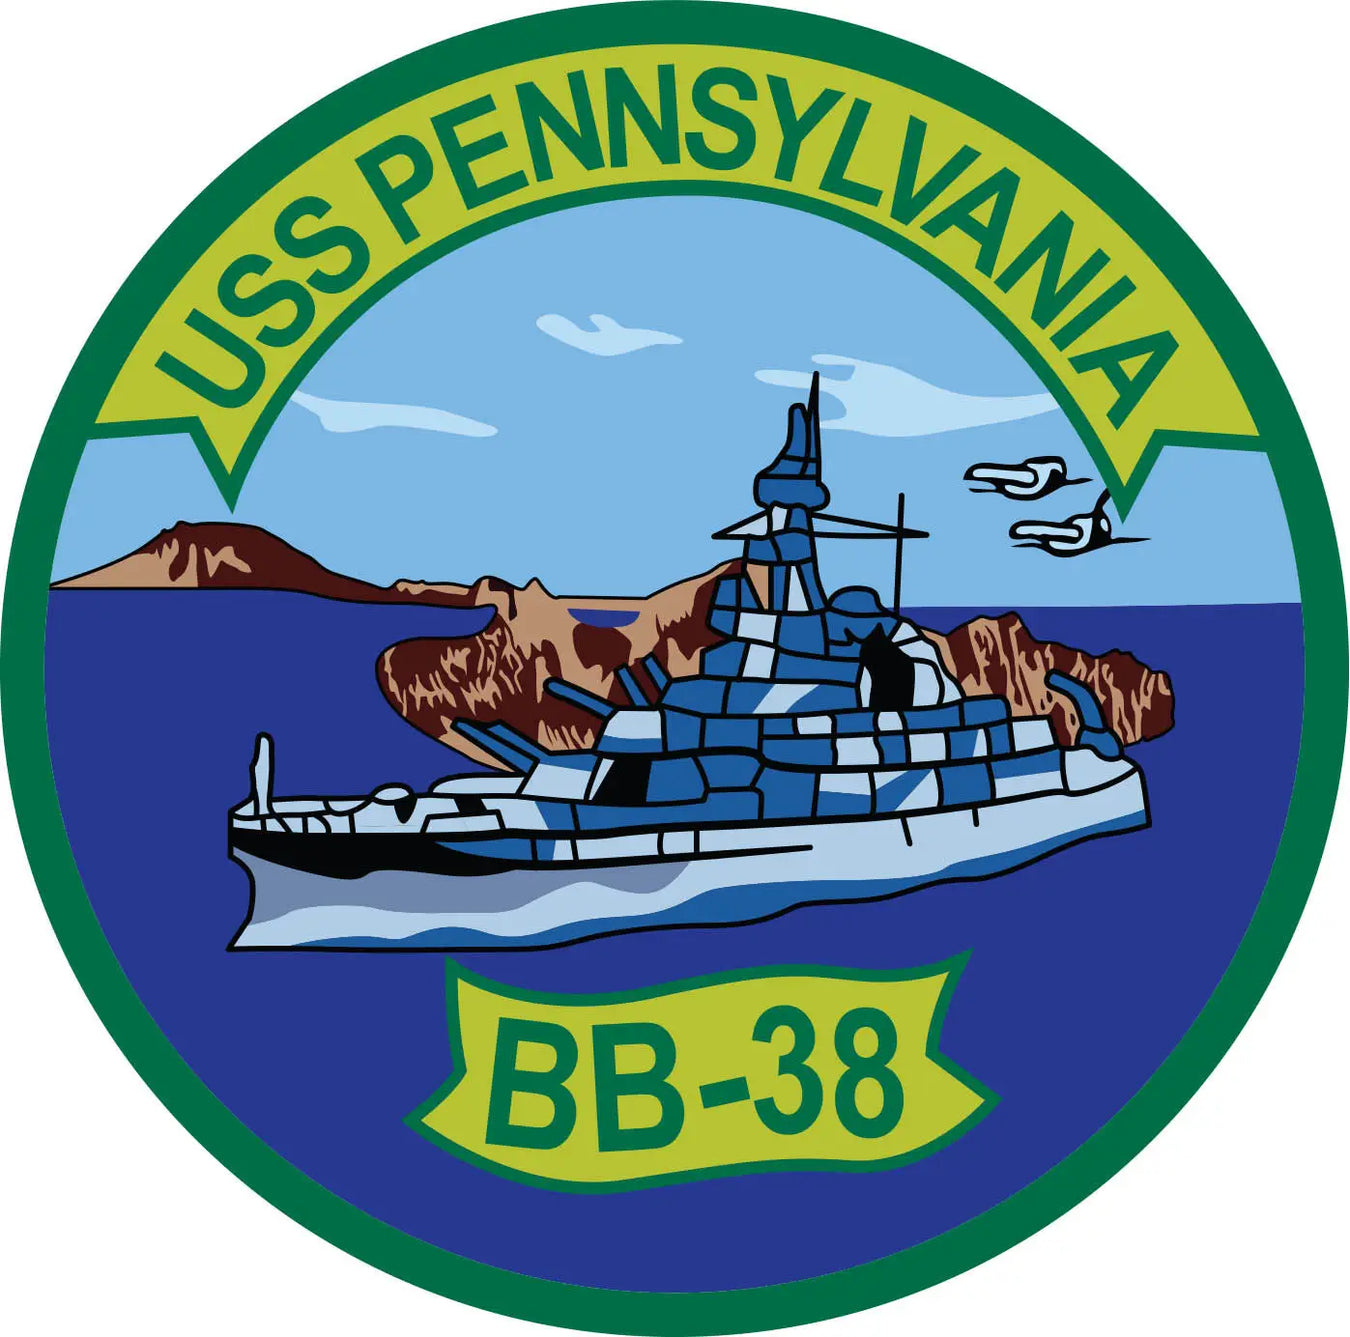 USS Pennsylvania (BB-38) Merchandise - Shop T-Shirts, hoodies, patches, pins, flags, decals, hats and more.